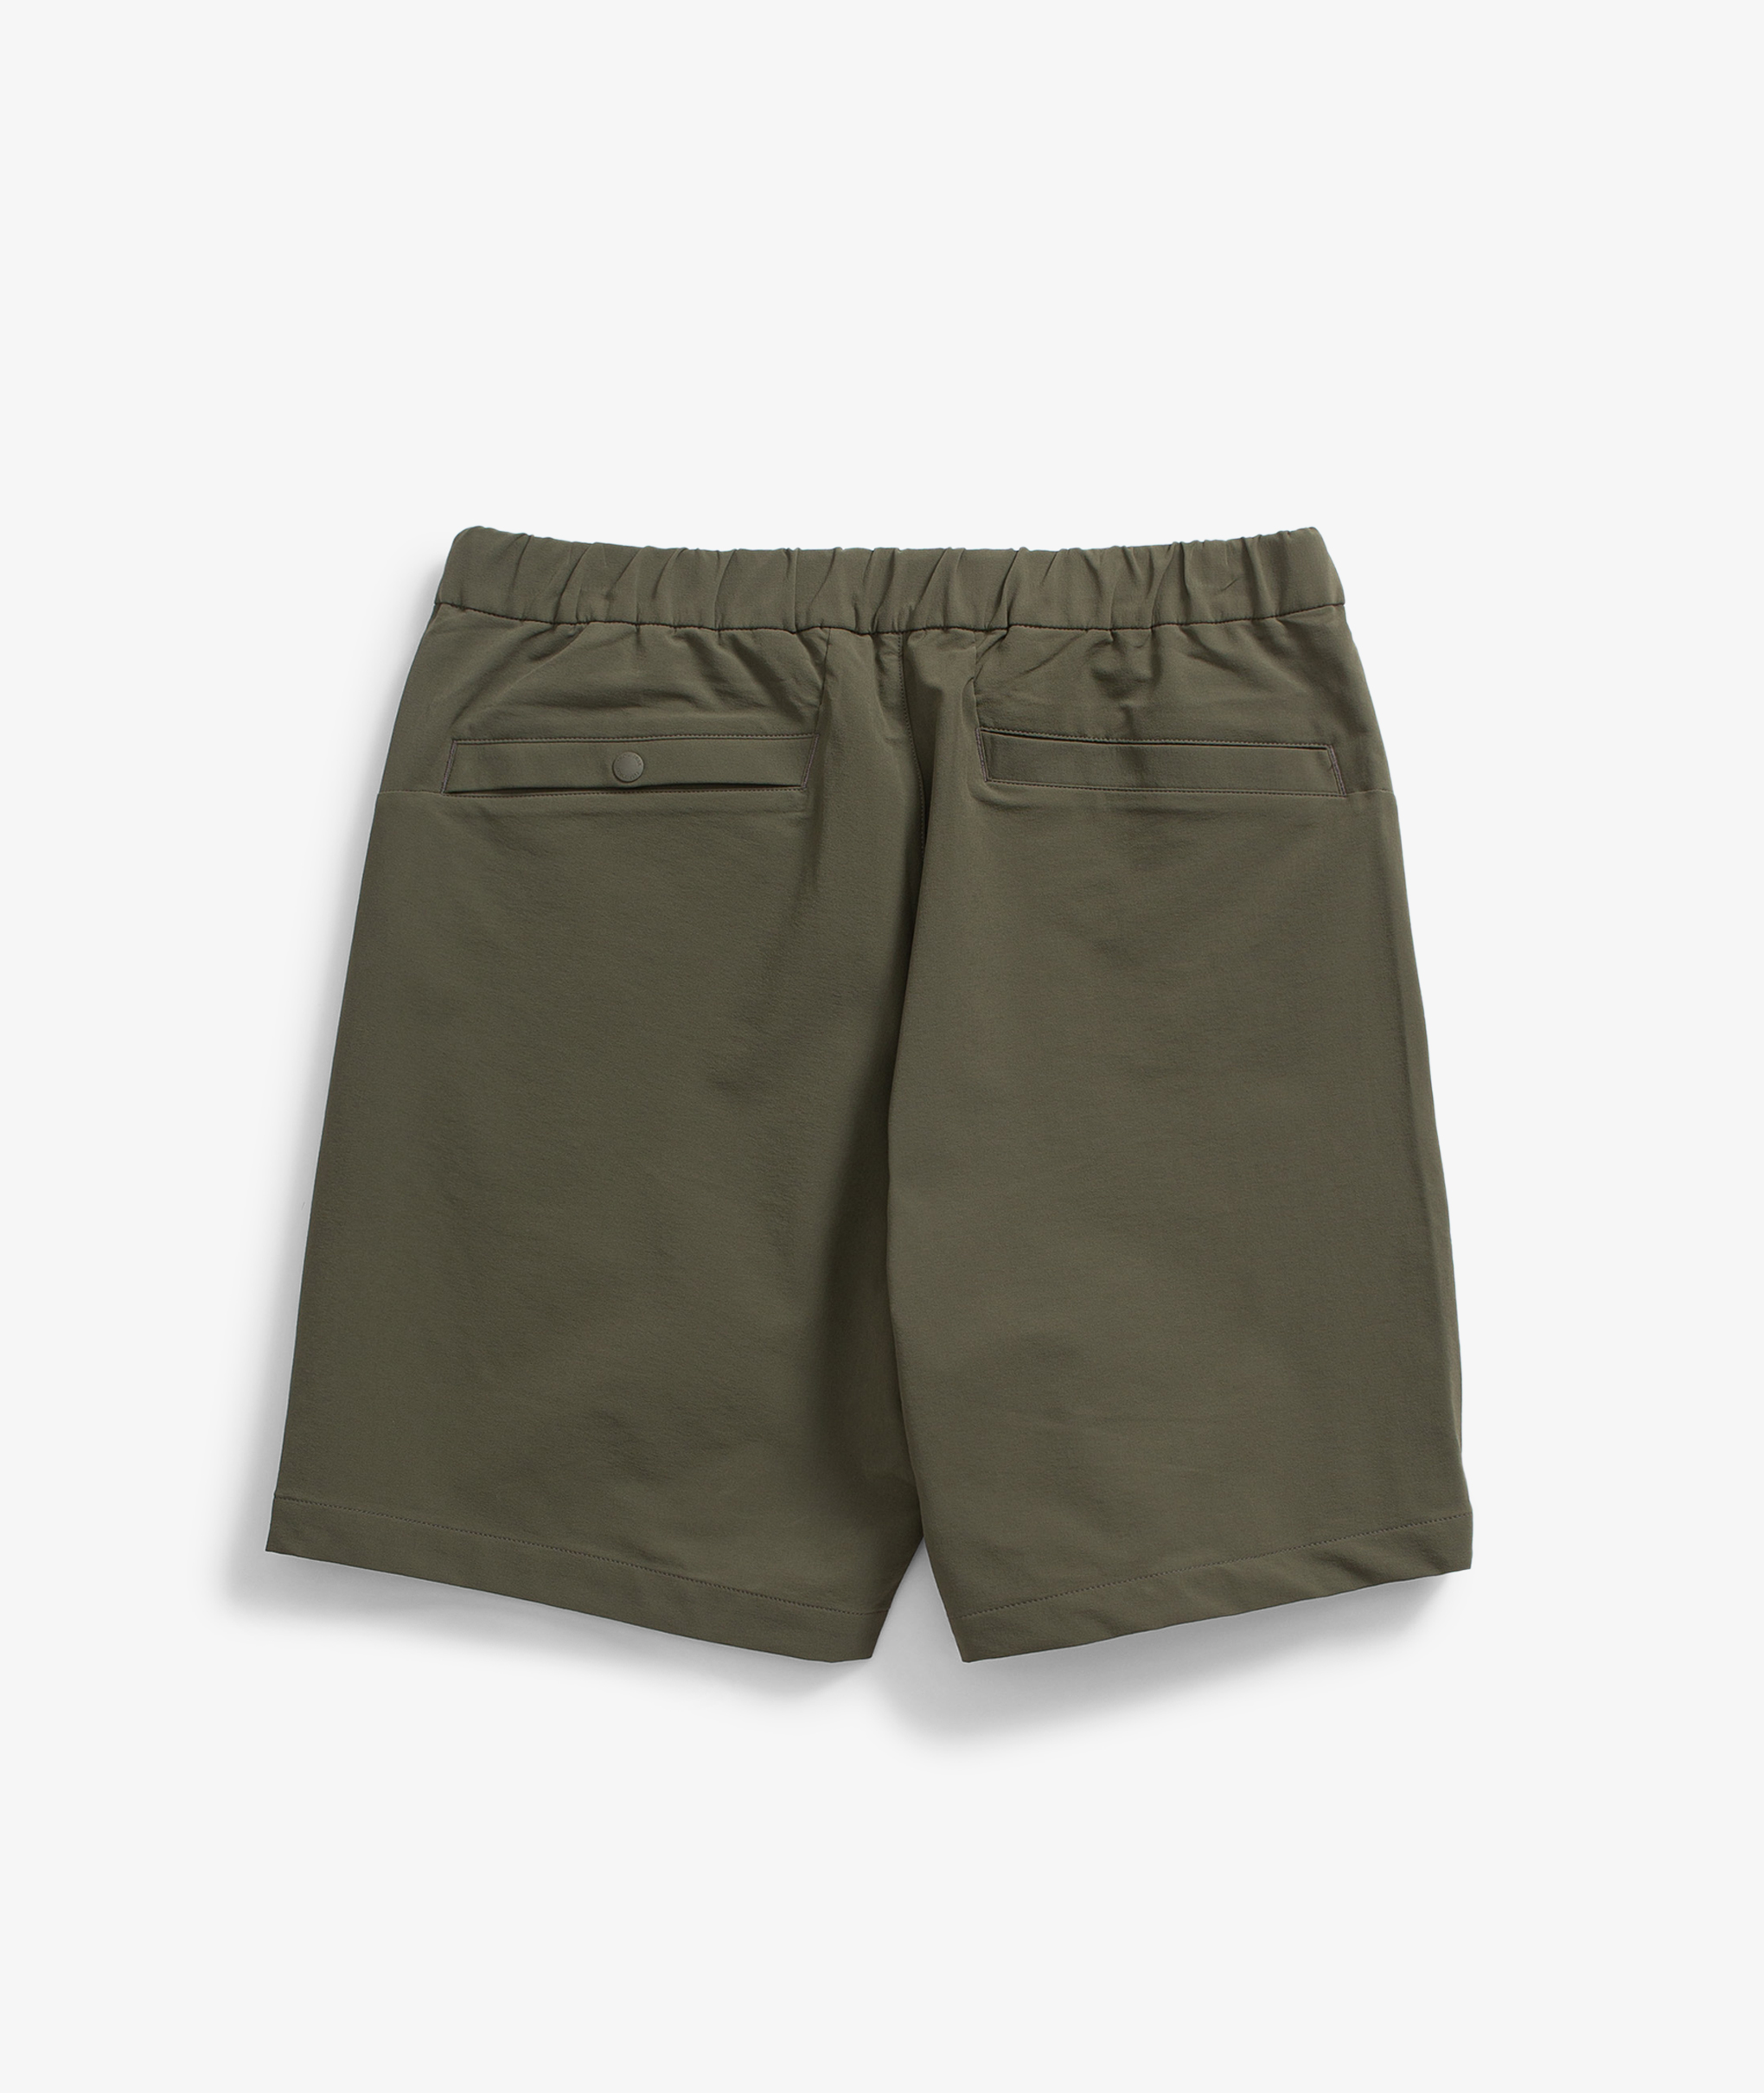 Norse Store | Shipping Worldwide - Snow Peak DWR Comfort Shorts - Olive